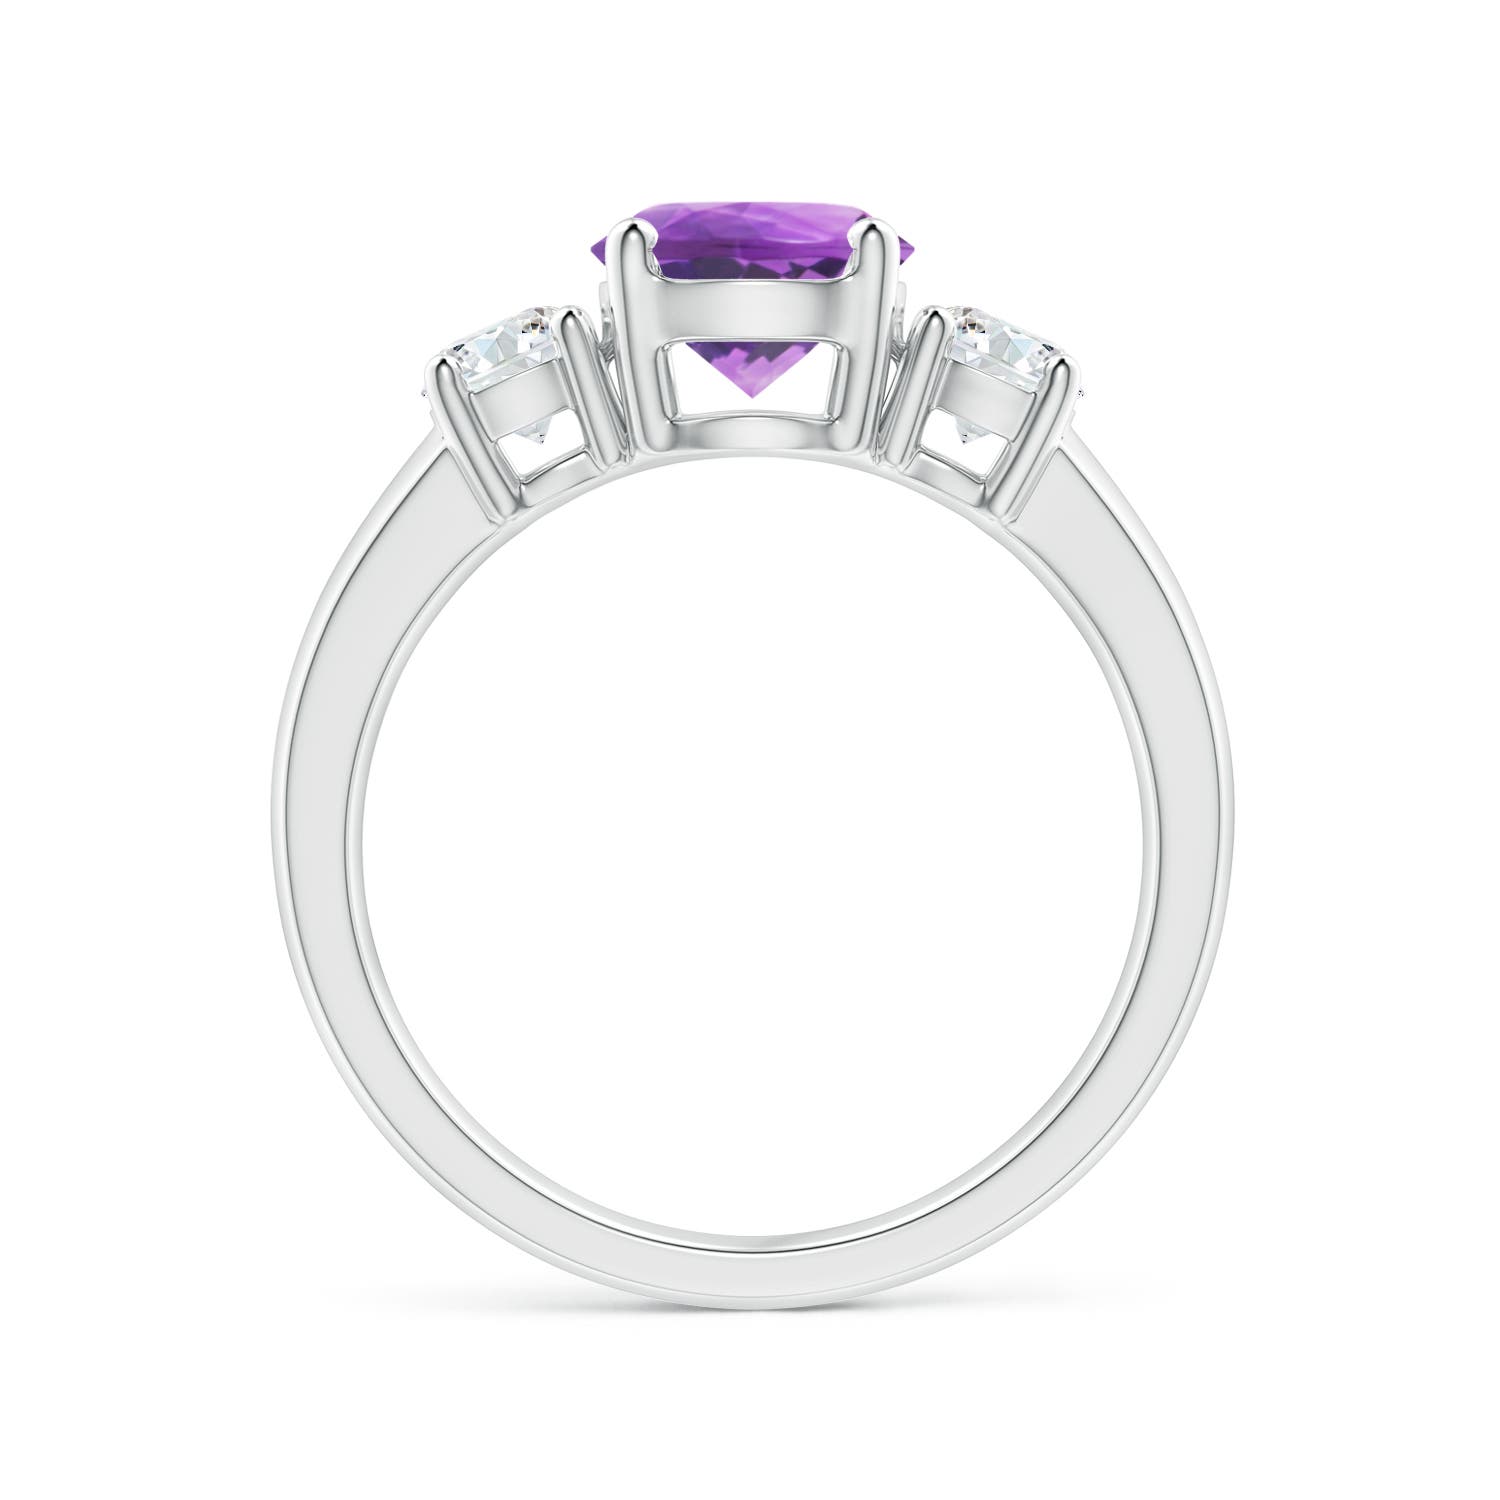 AA - Amethyst / 1.61 CT / 14 KT White Gold